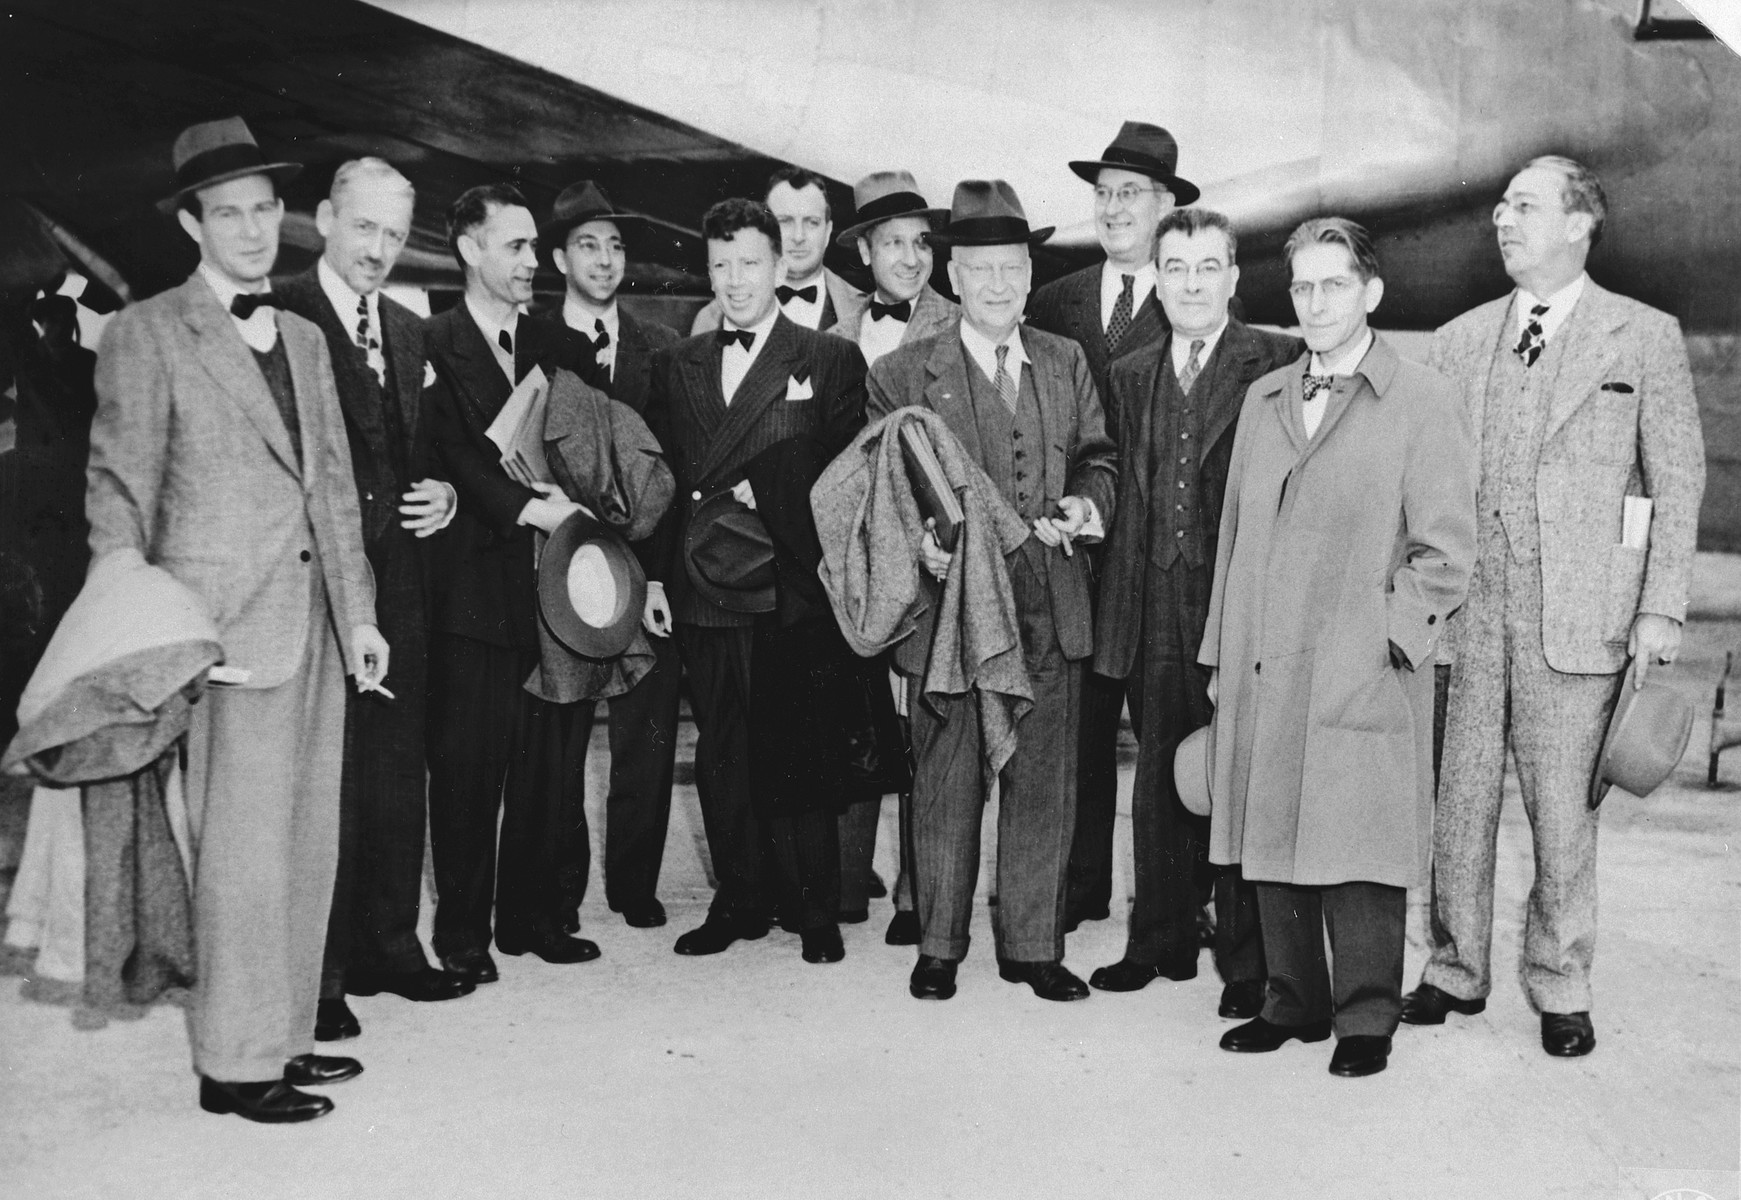 Group portrait of American editors and newsmen who are touring the Zeilsheim displaced persons camp.

The original caption reads, "This is a group photo of the American newsmen and editors that visited the Zeilsheim DP camp in Hanau, Germany. They were reporting on the military government installations and the activities of the US army occupational forces."